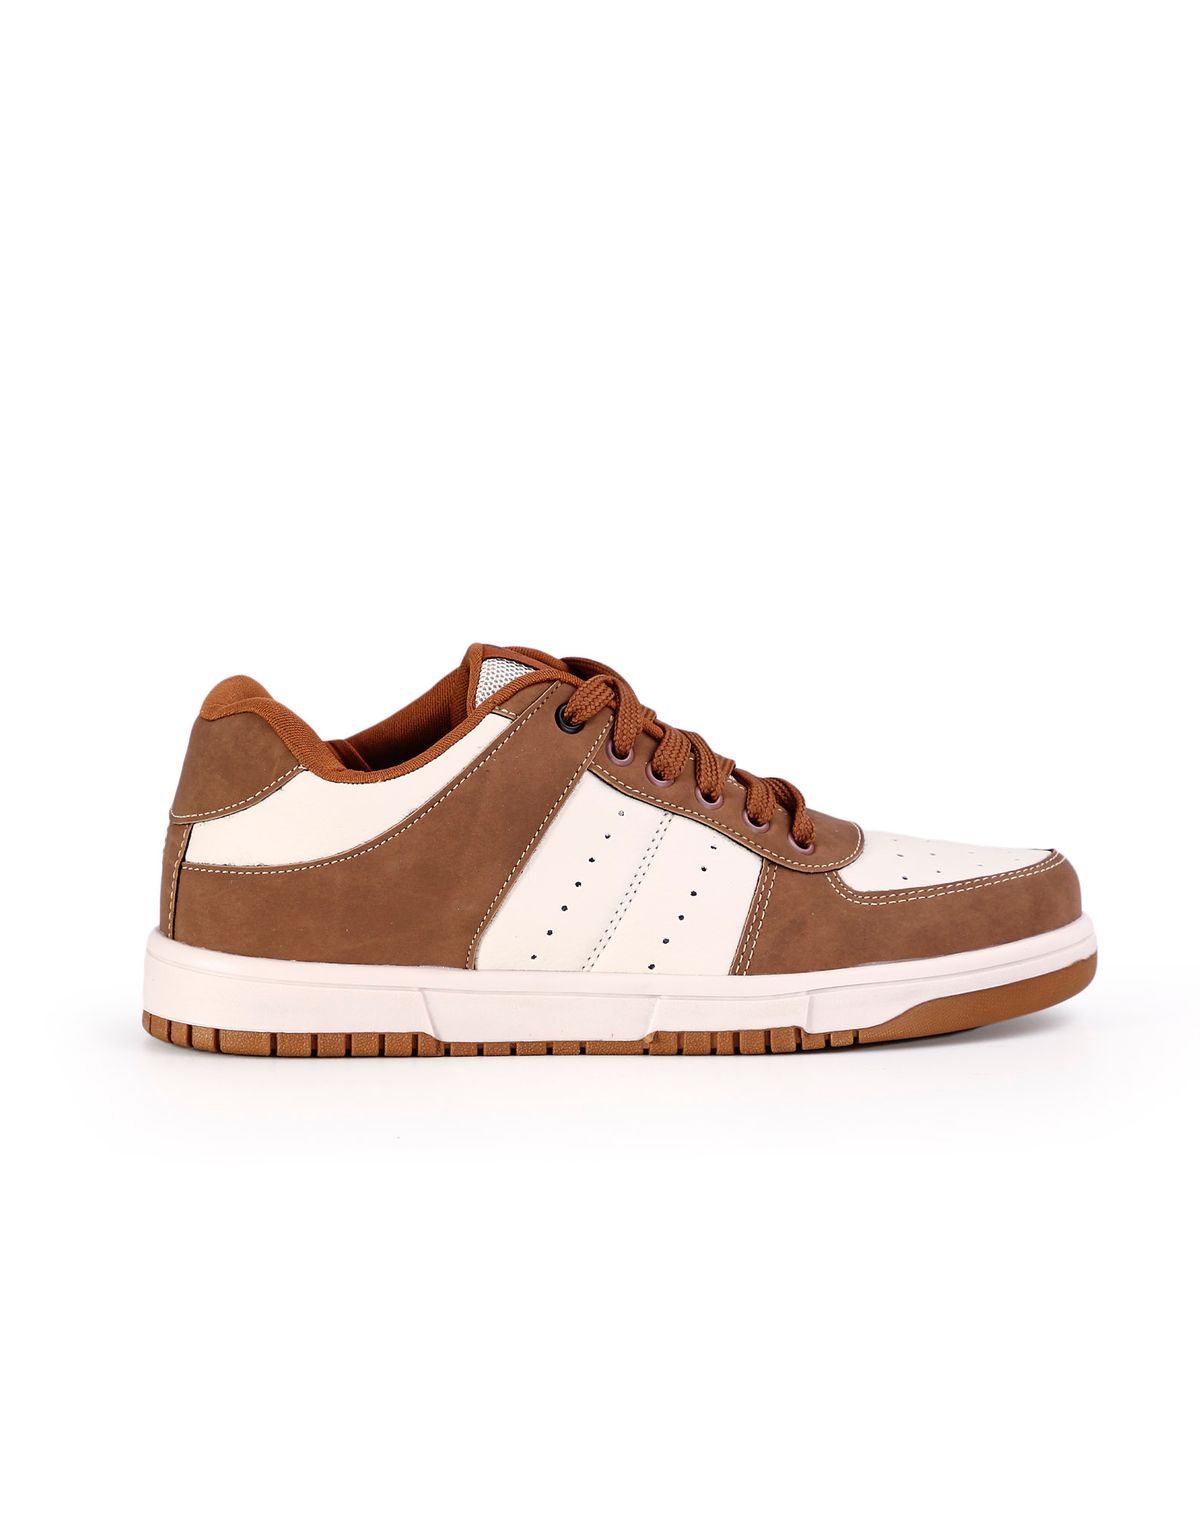 690414003-tenis-masculino-dunky-street-recortes-ollie-camel-39-6e4